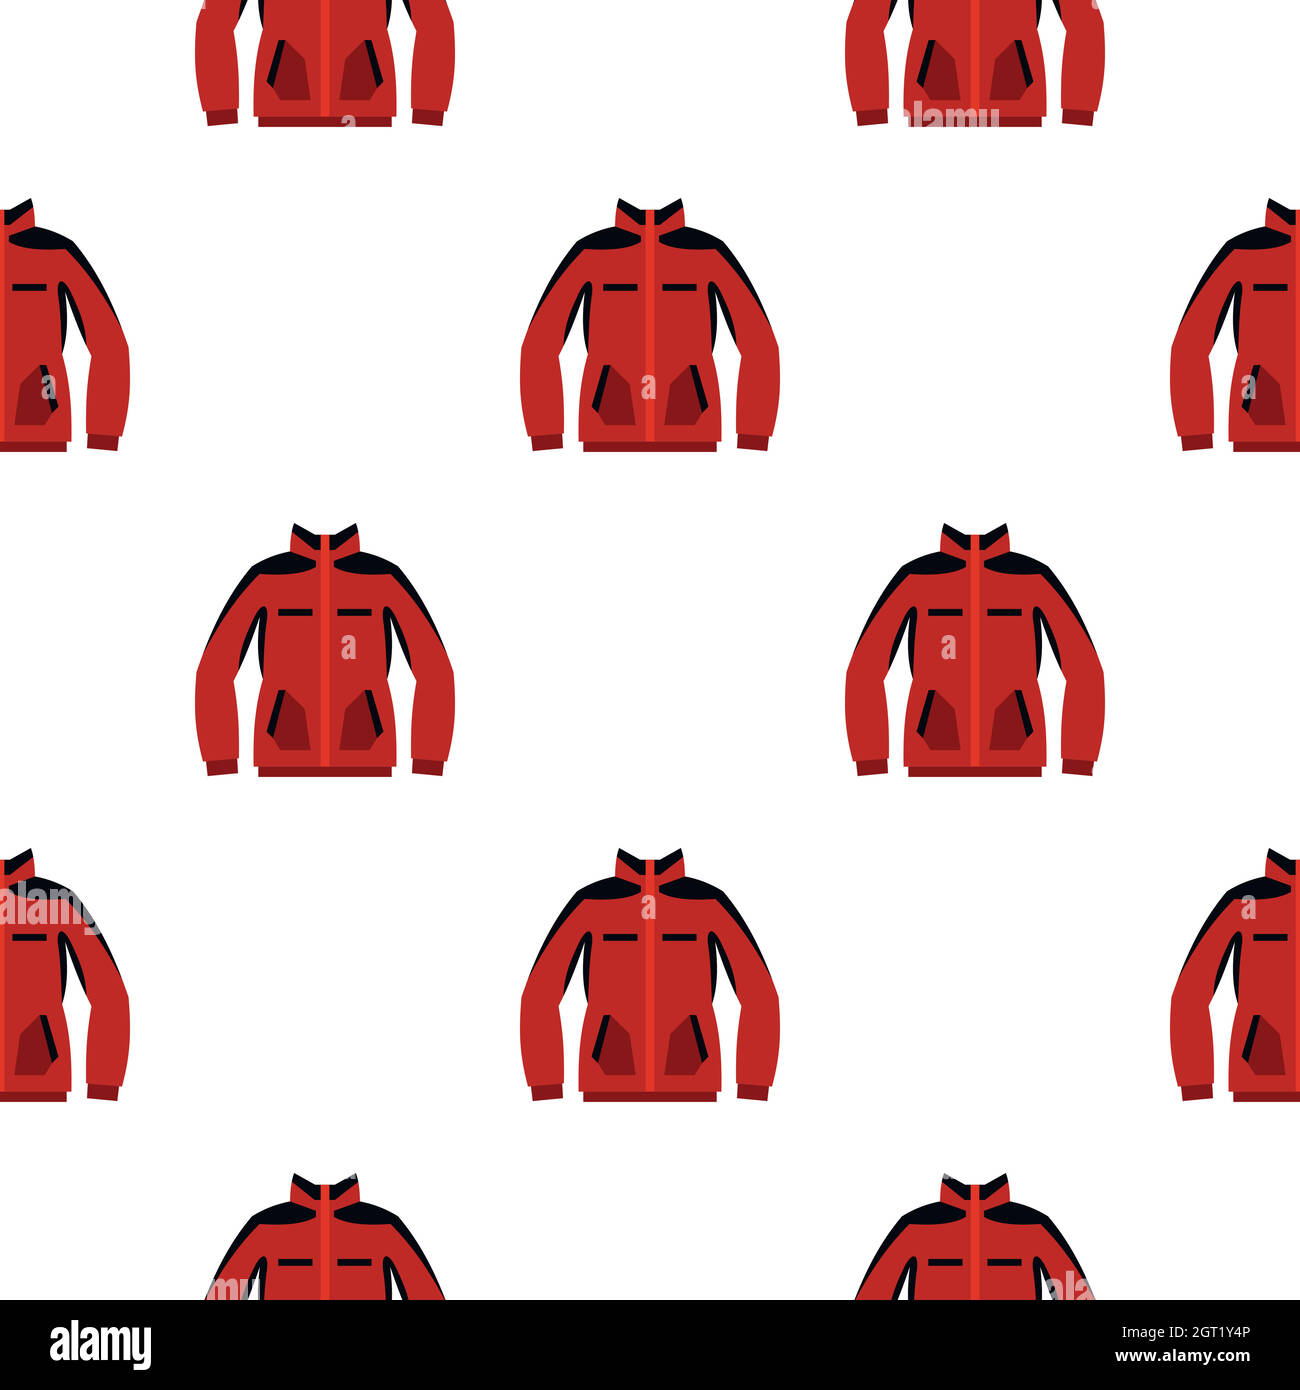 Red sweatshirt with a zipper pattern seamless Stock Vector